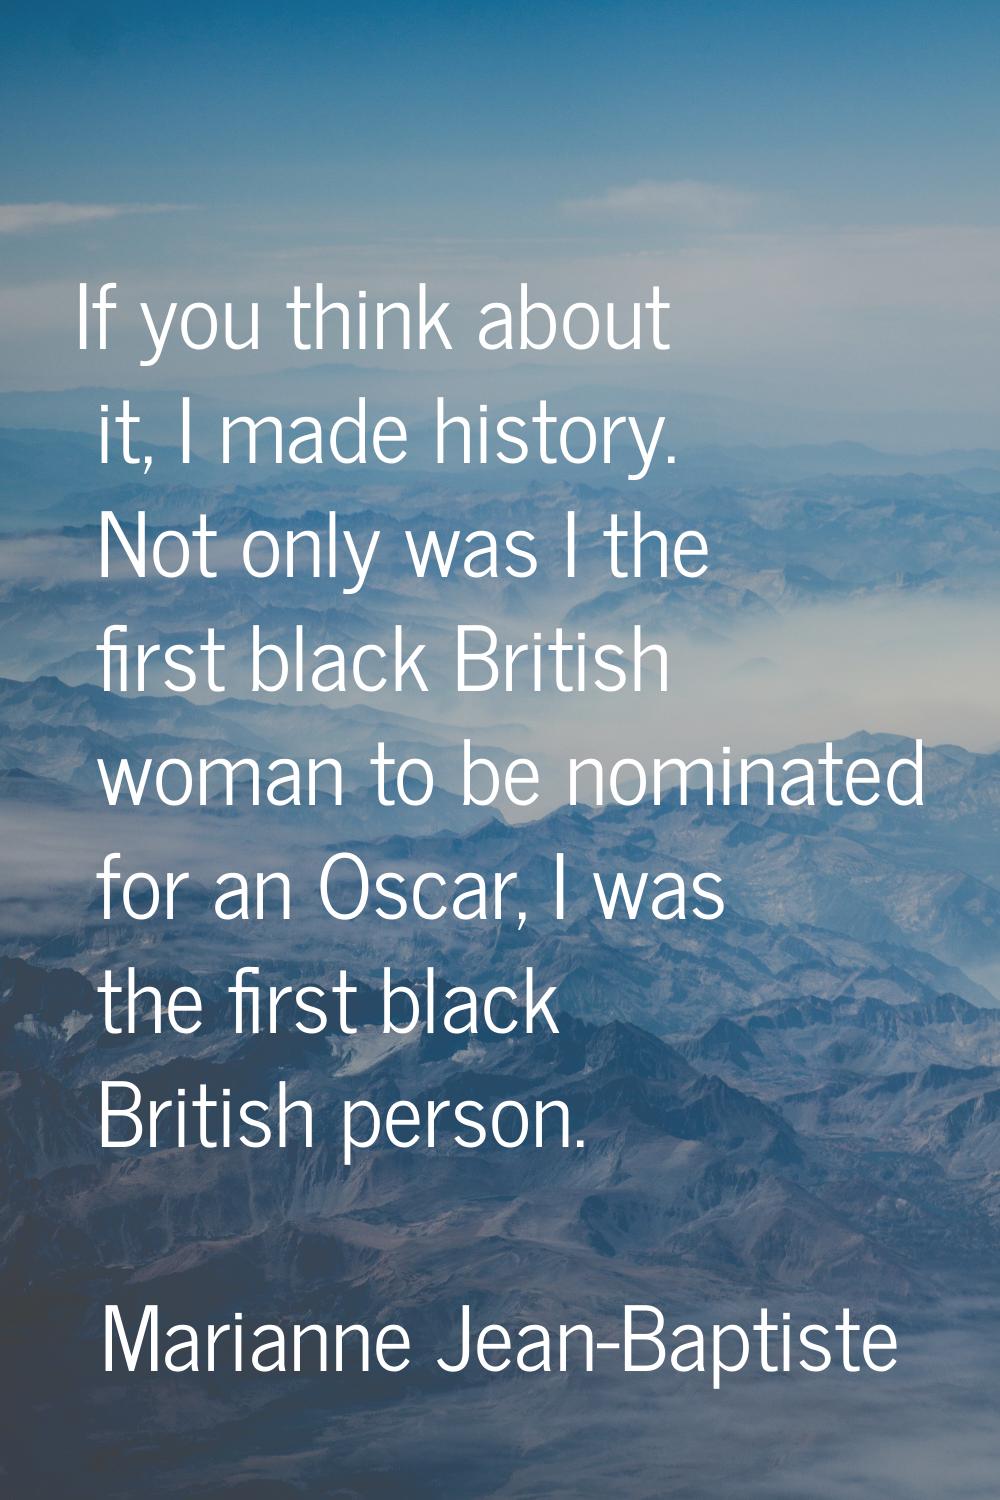 If you think about it, I made history. Not only was I the first black British woman to be nominated